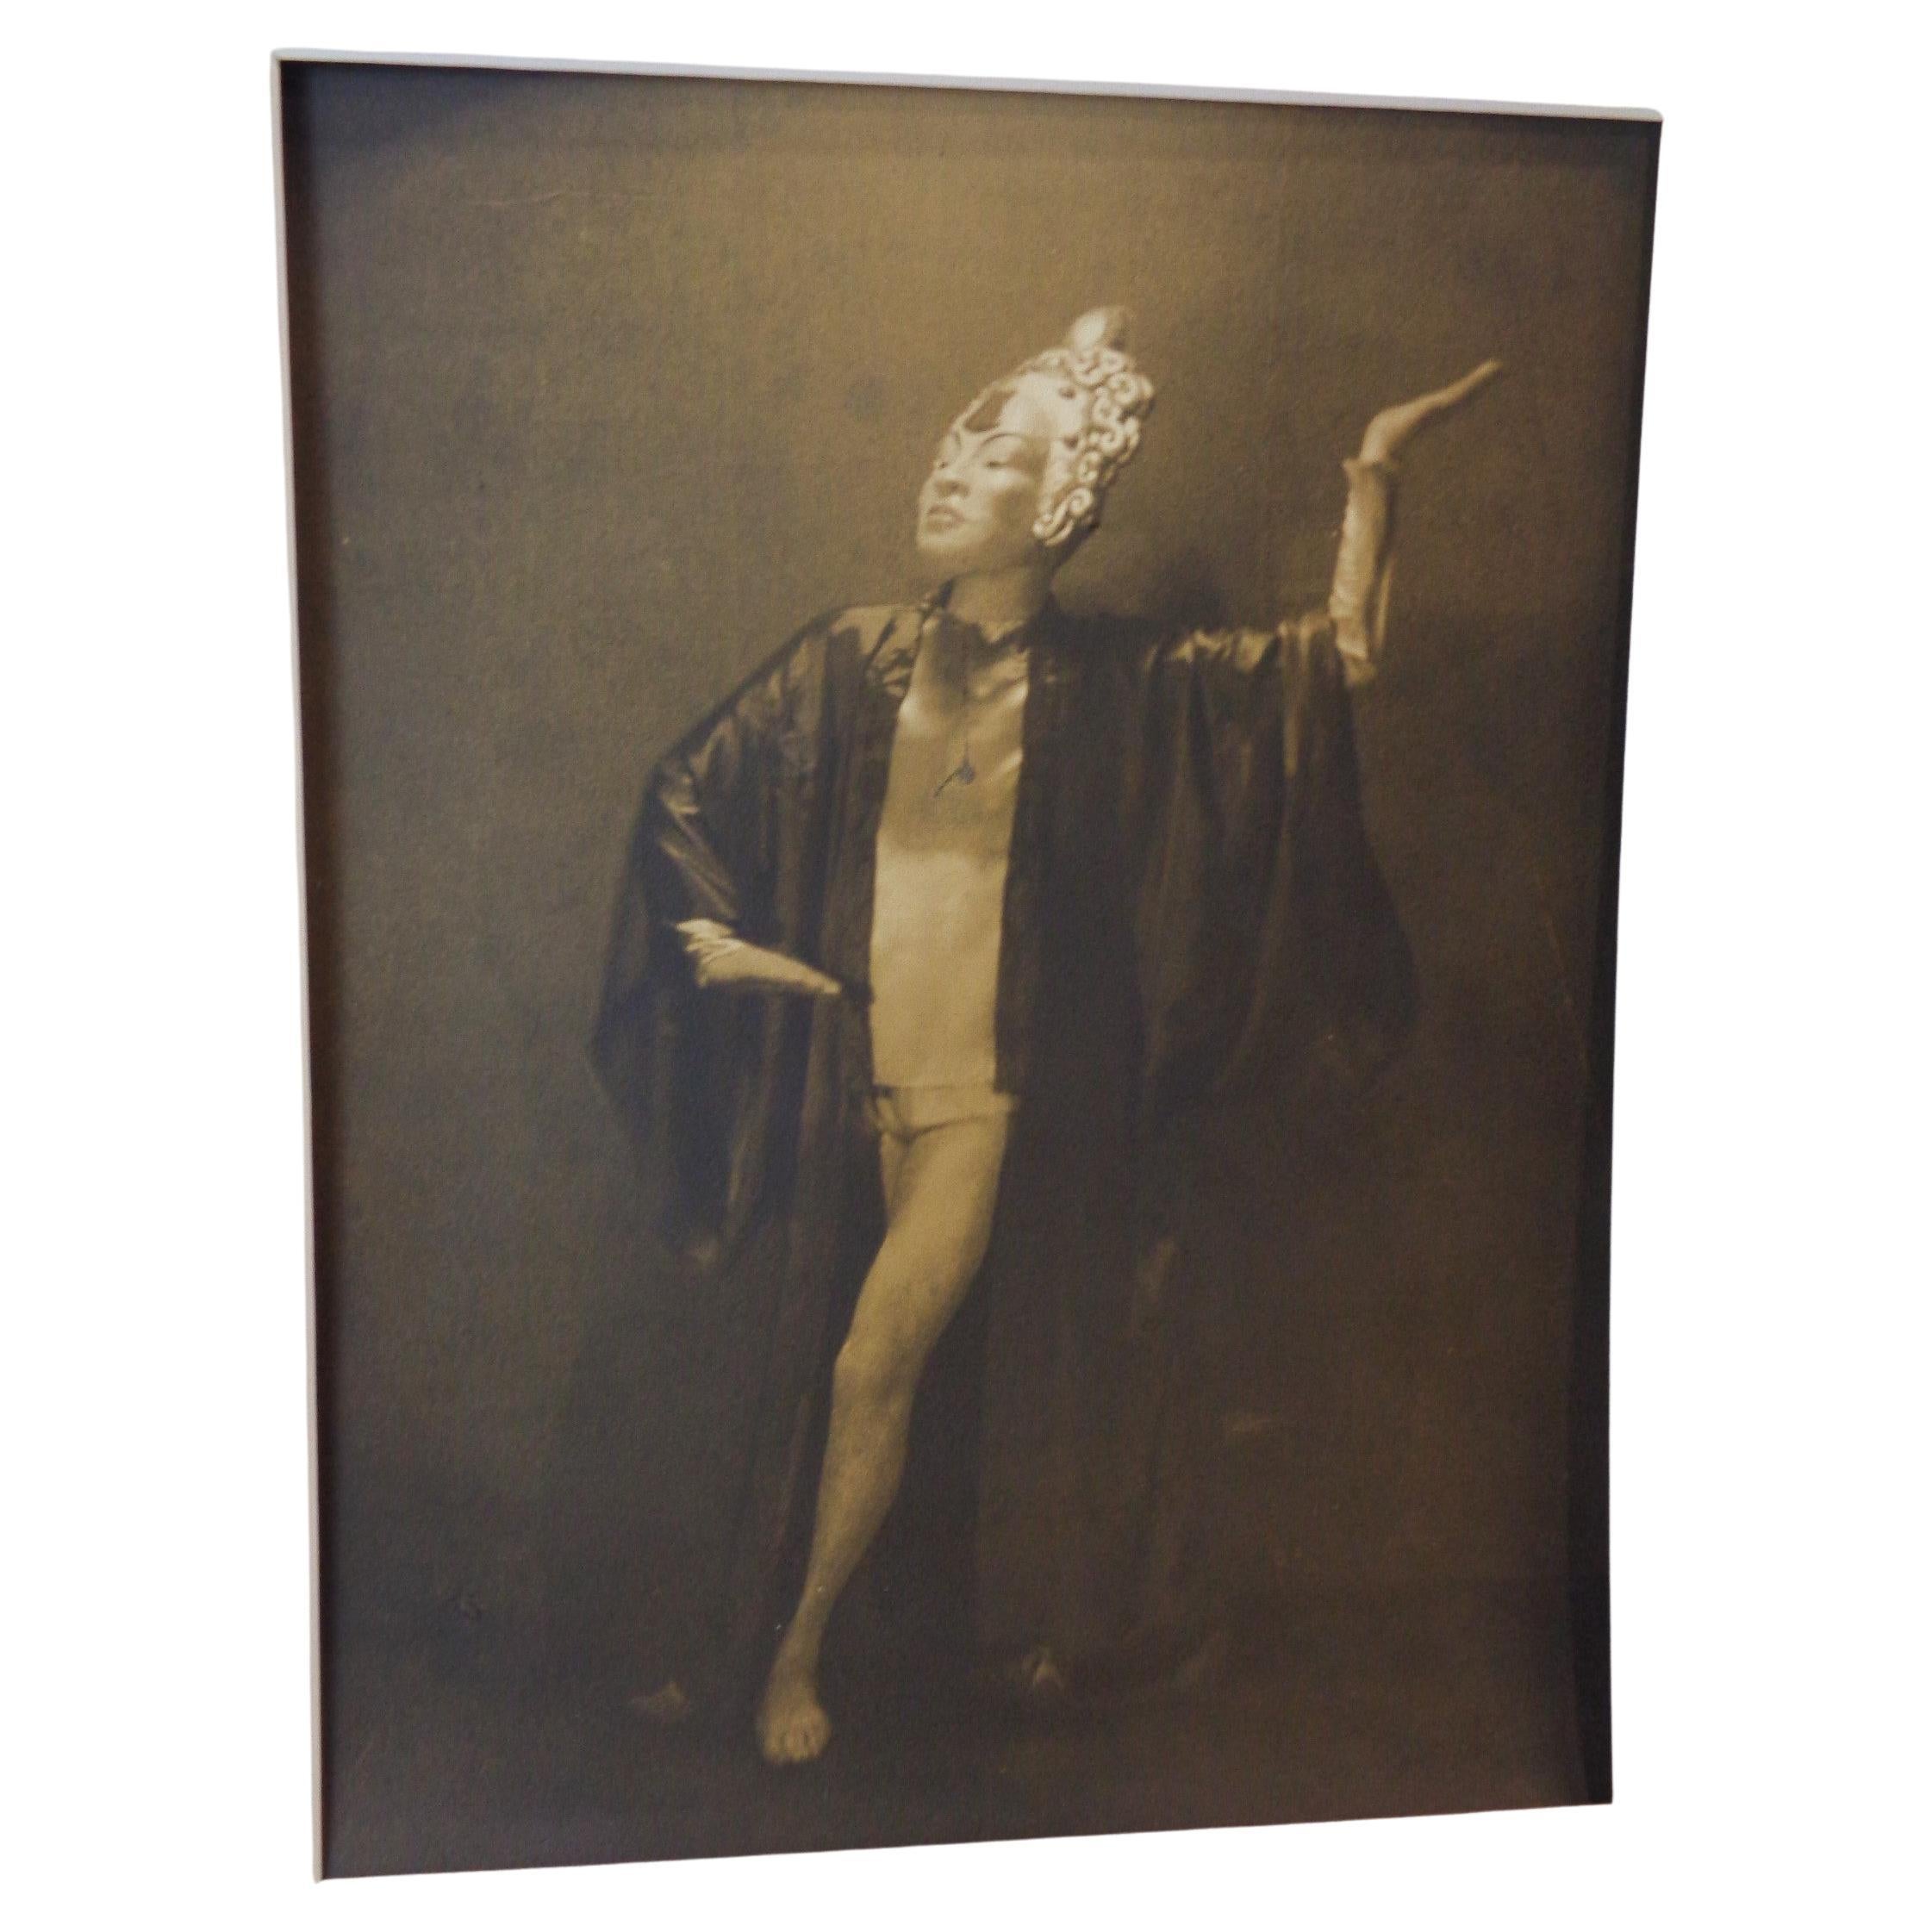 Early 20th Century Original Pictorialist Sepia Tone Gelatin Silver Print Photograph Exotic Dancer For Sale